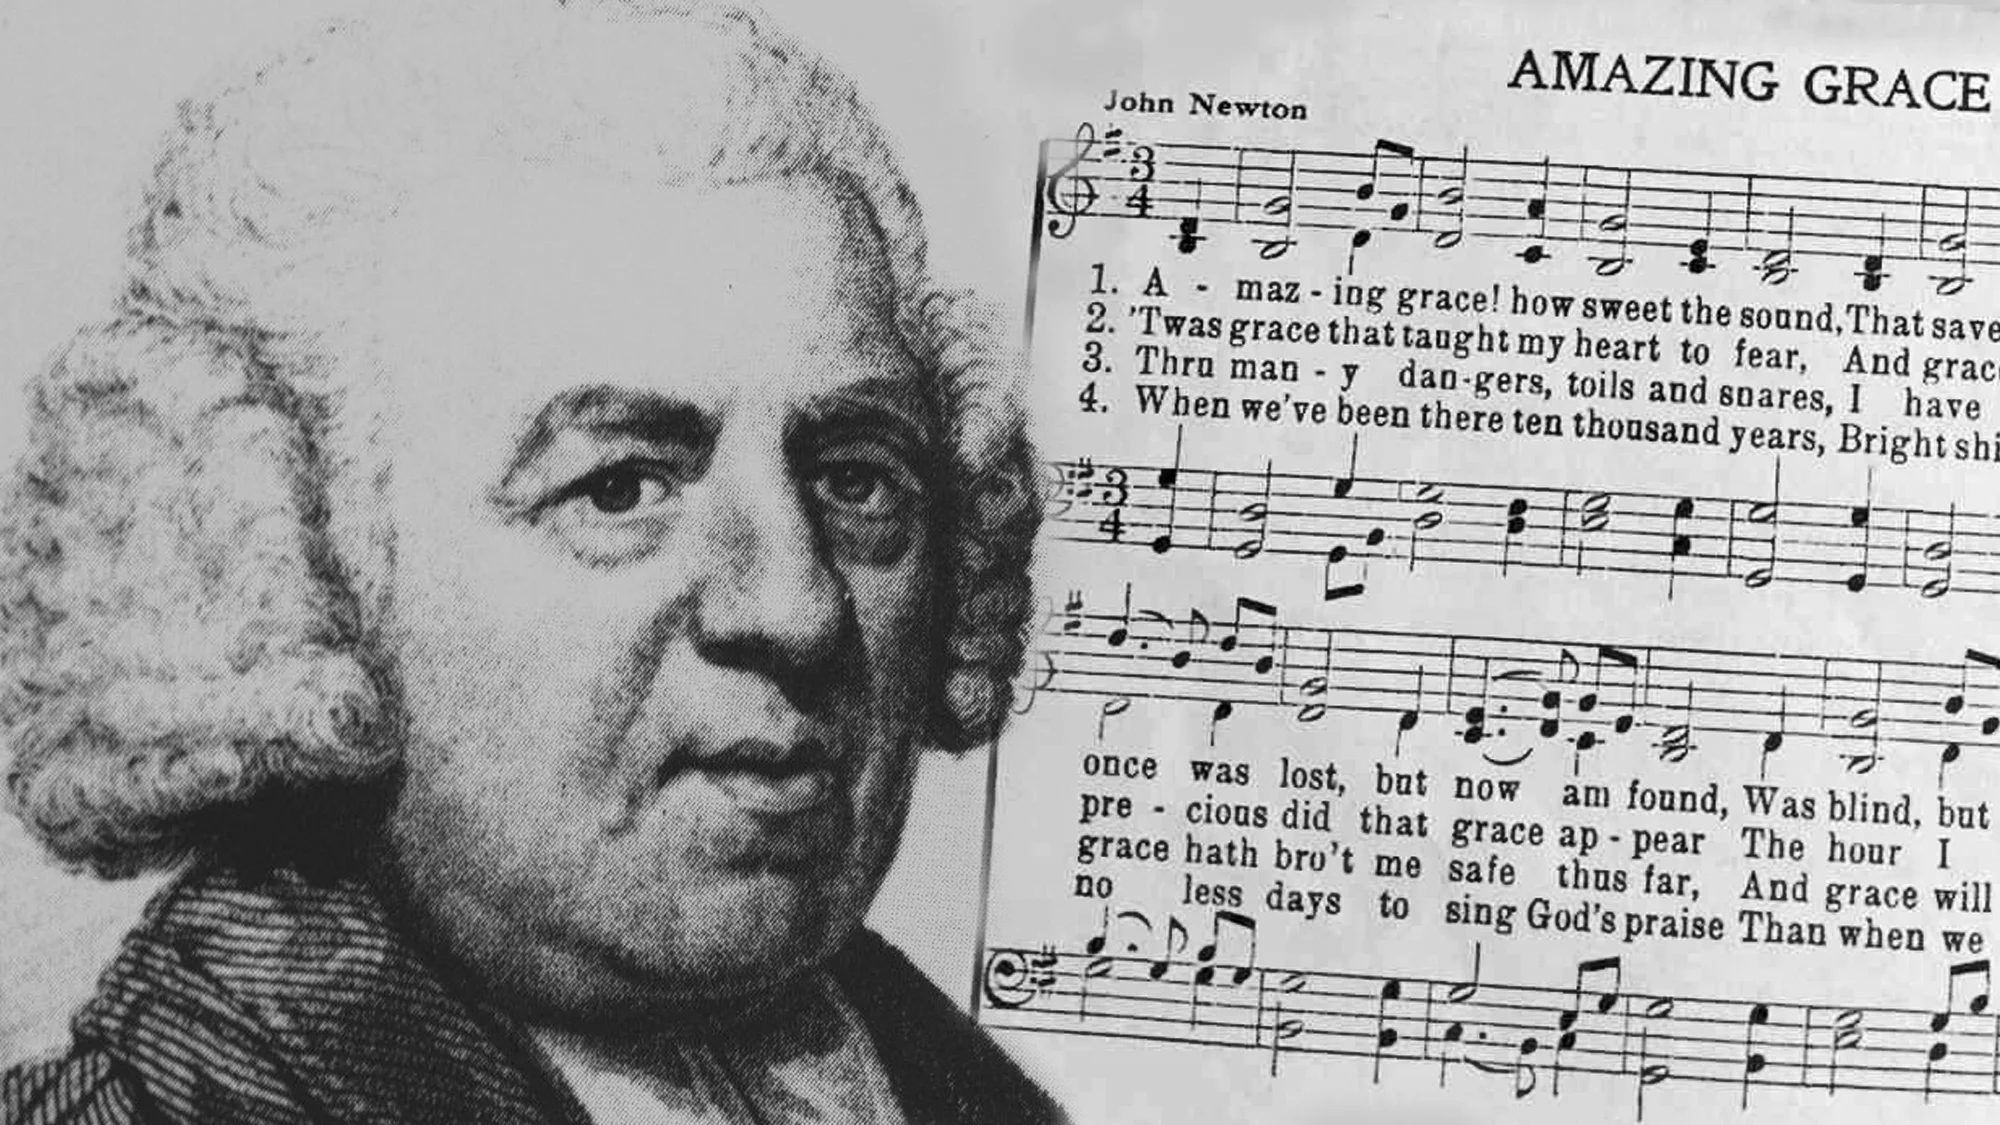 Download John Newton Amazing Grace sheet music - The Story Behind the Amazing Grace Song